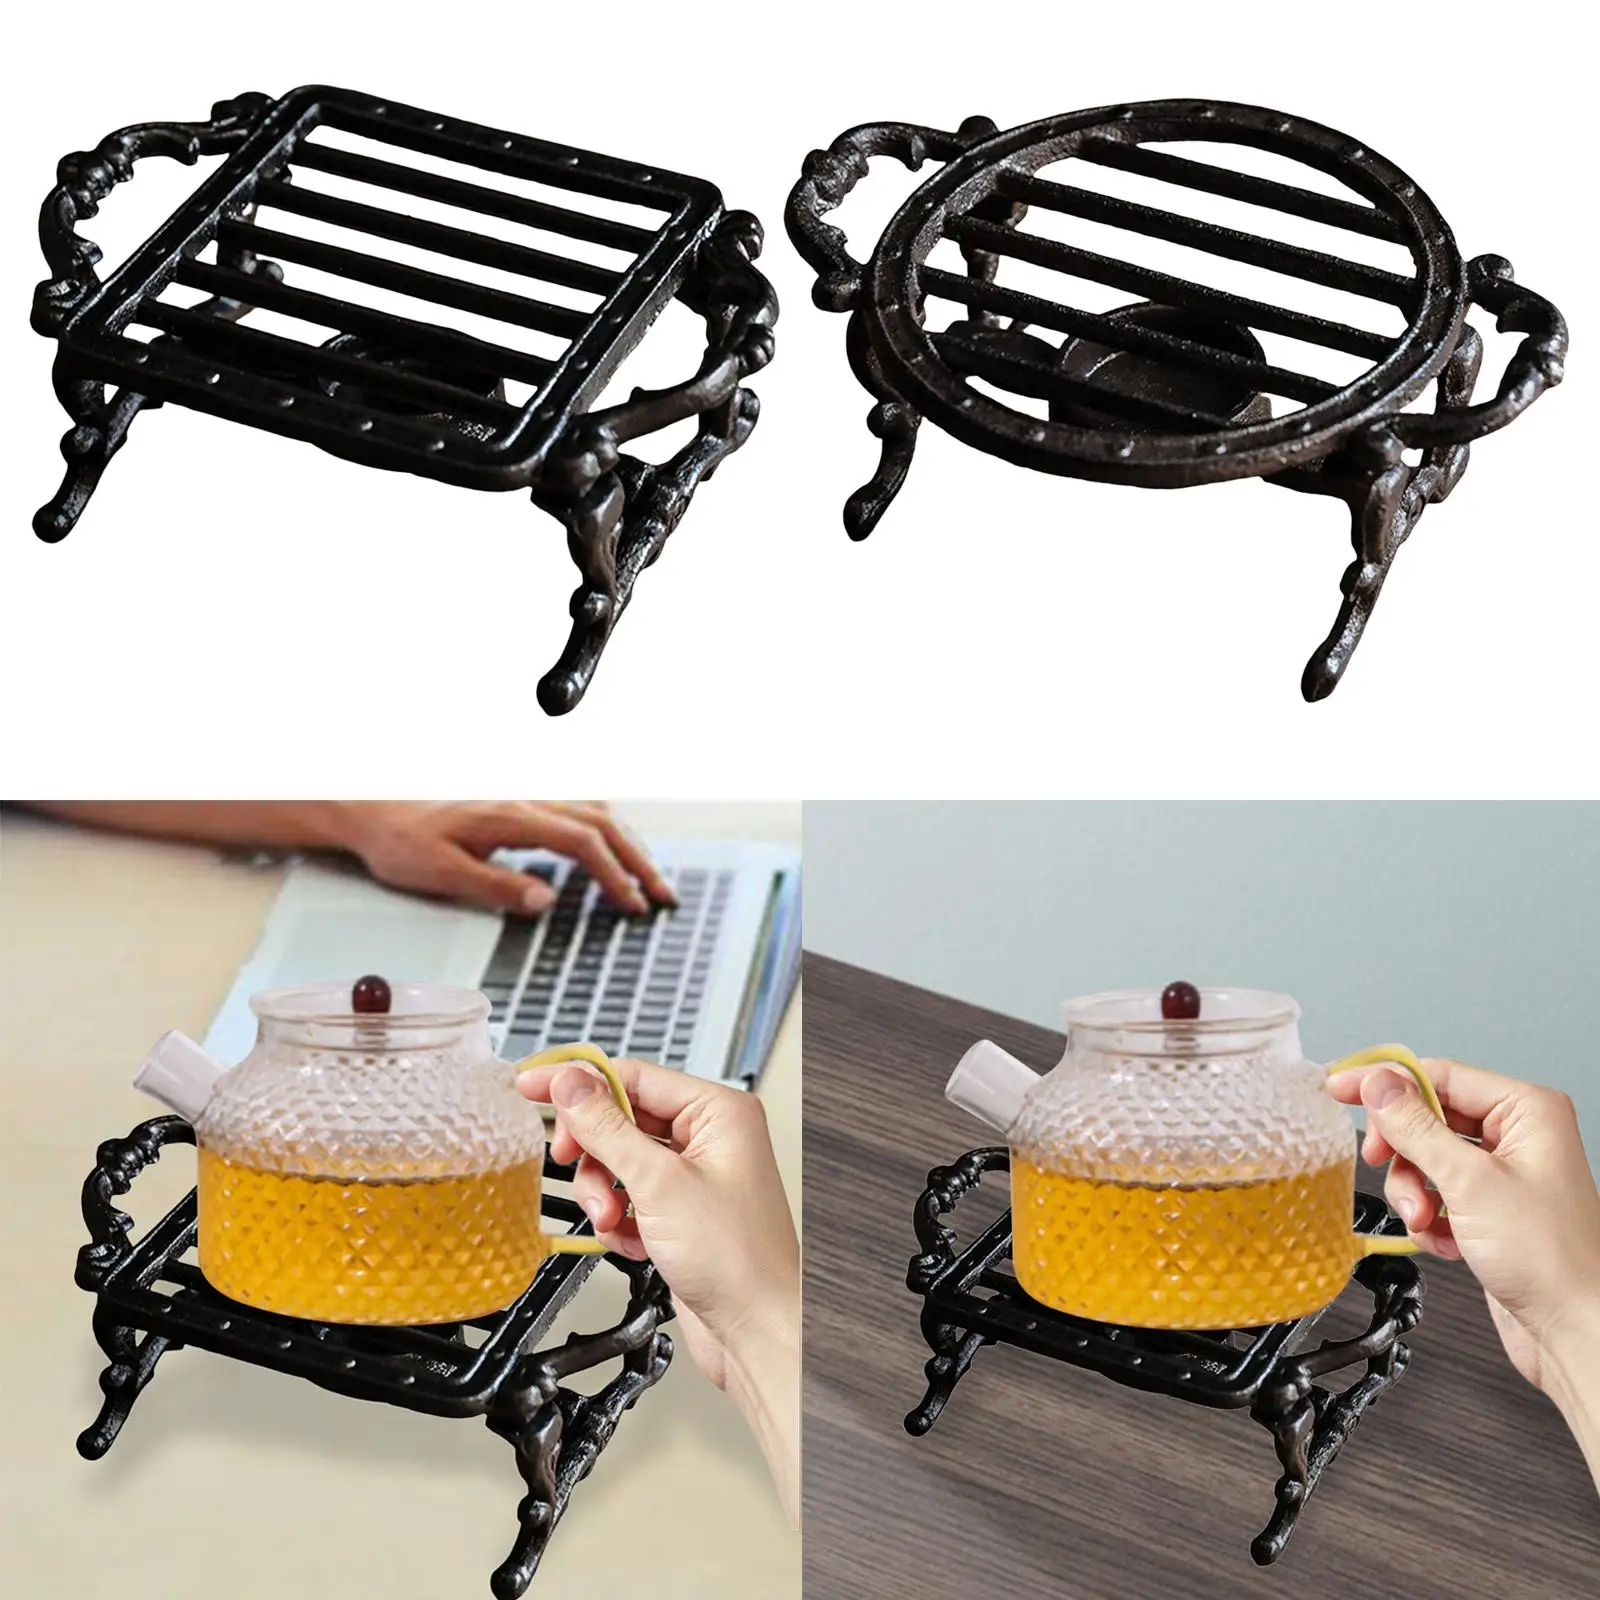 https://ae01.alicdn.com/kf/Sd5ad1771a91f4b08b08445023fef571bw/Teapot-Warmer-Holder-Decorative-Candle-Holder-Stands-Insulation-Base-Teapot-Warmer-for-Camping-Travel-Heatcoffee-Milk.jpg